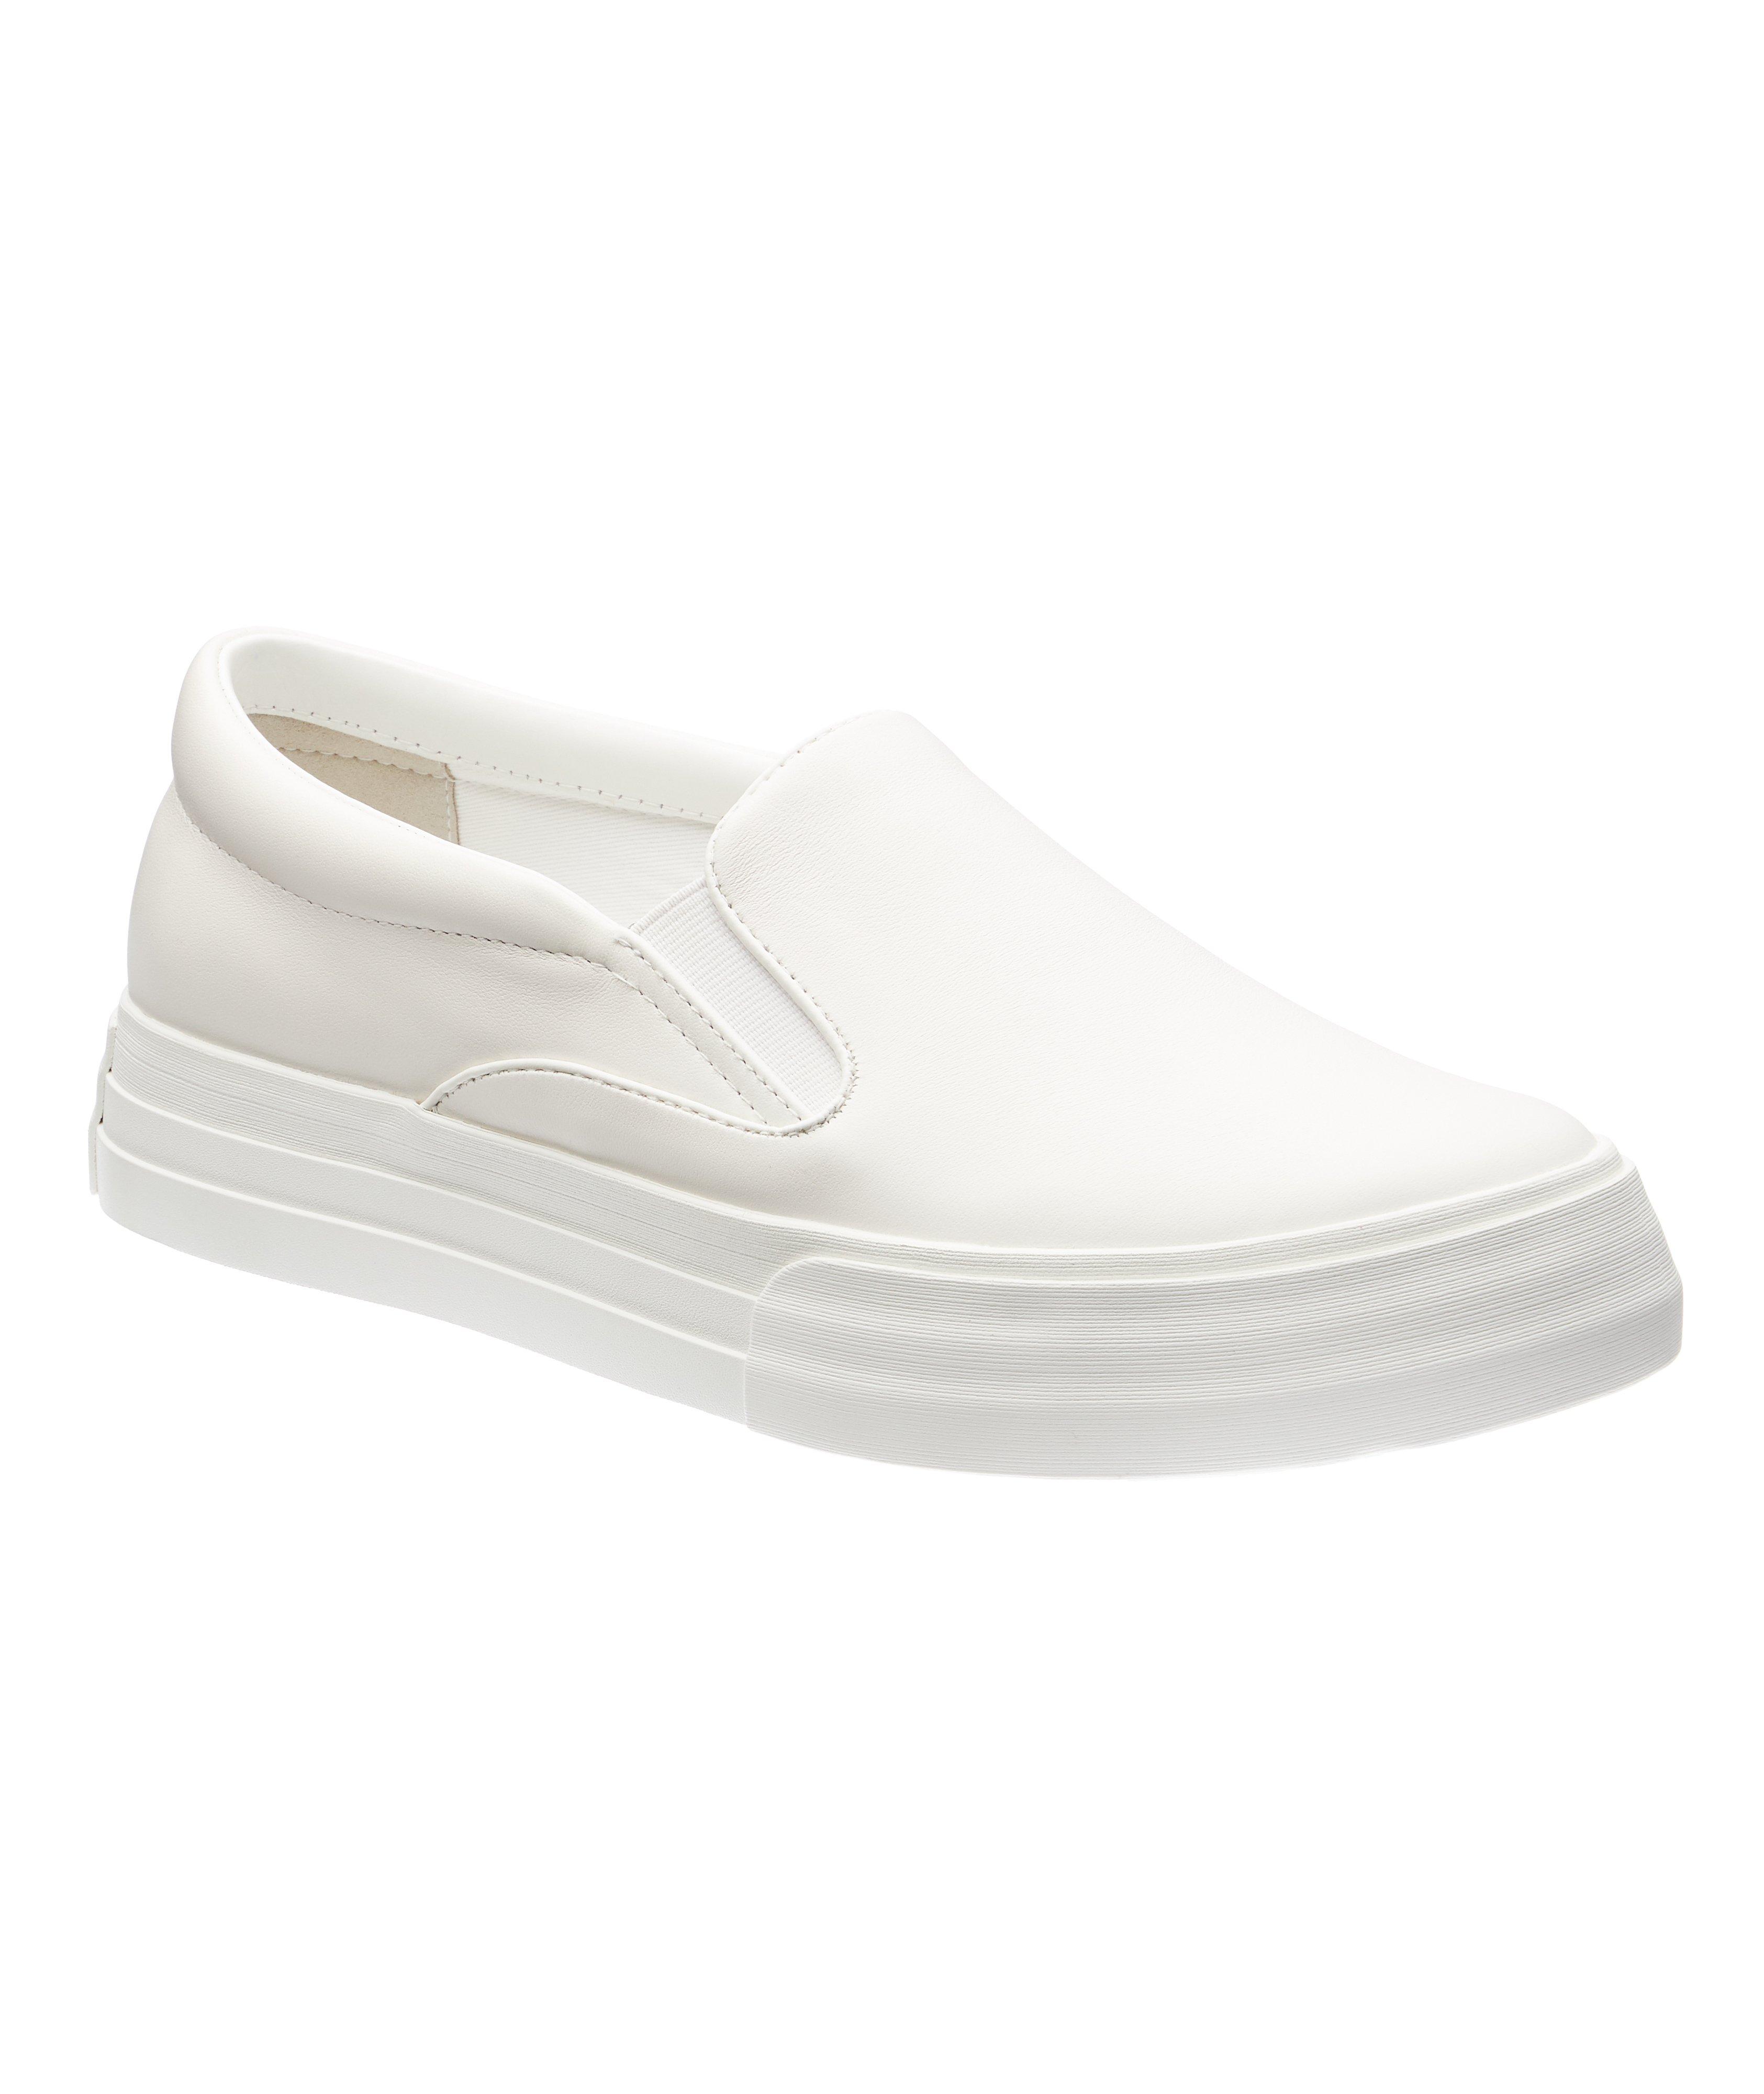 Slip-On Leather Sneakers image 0